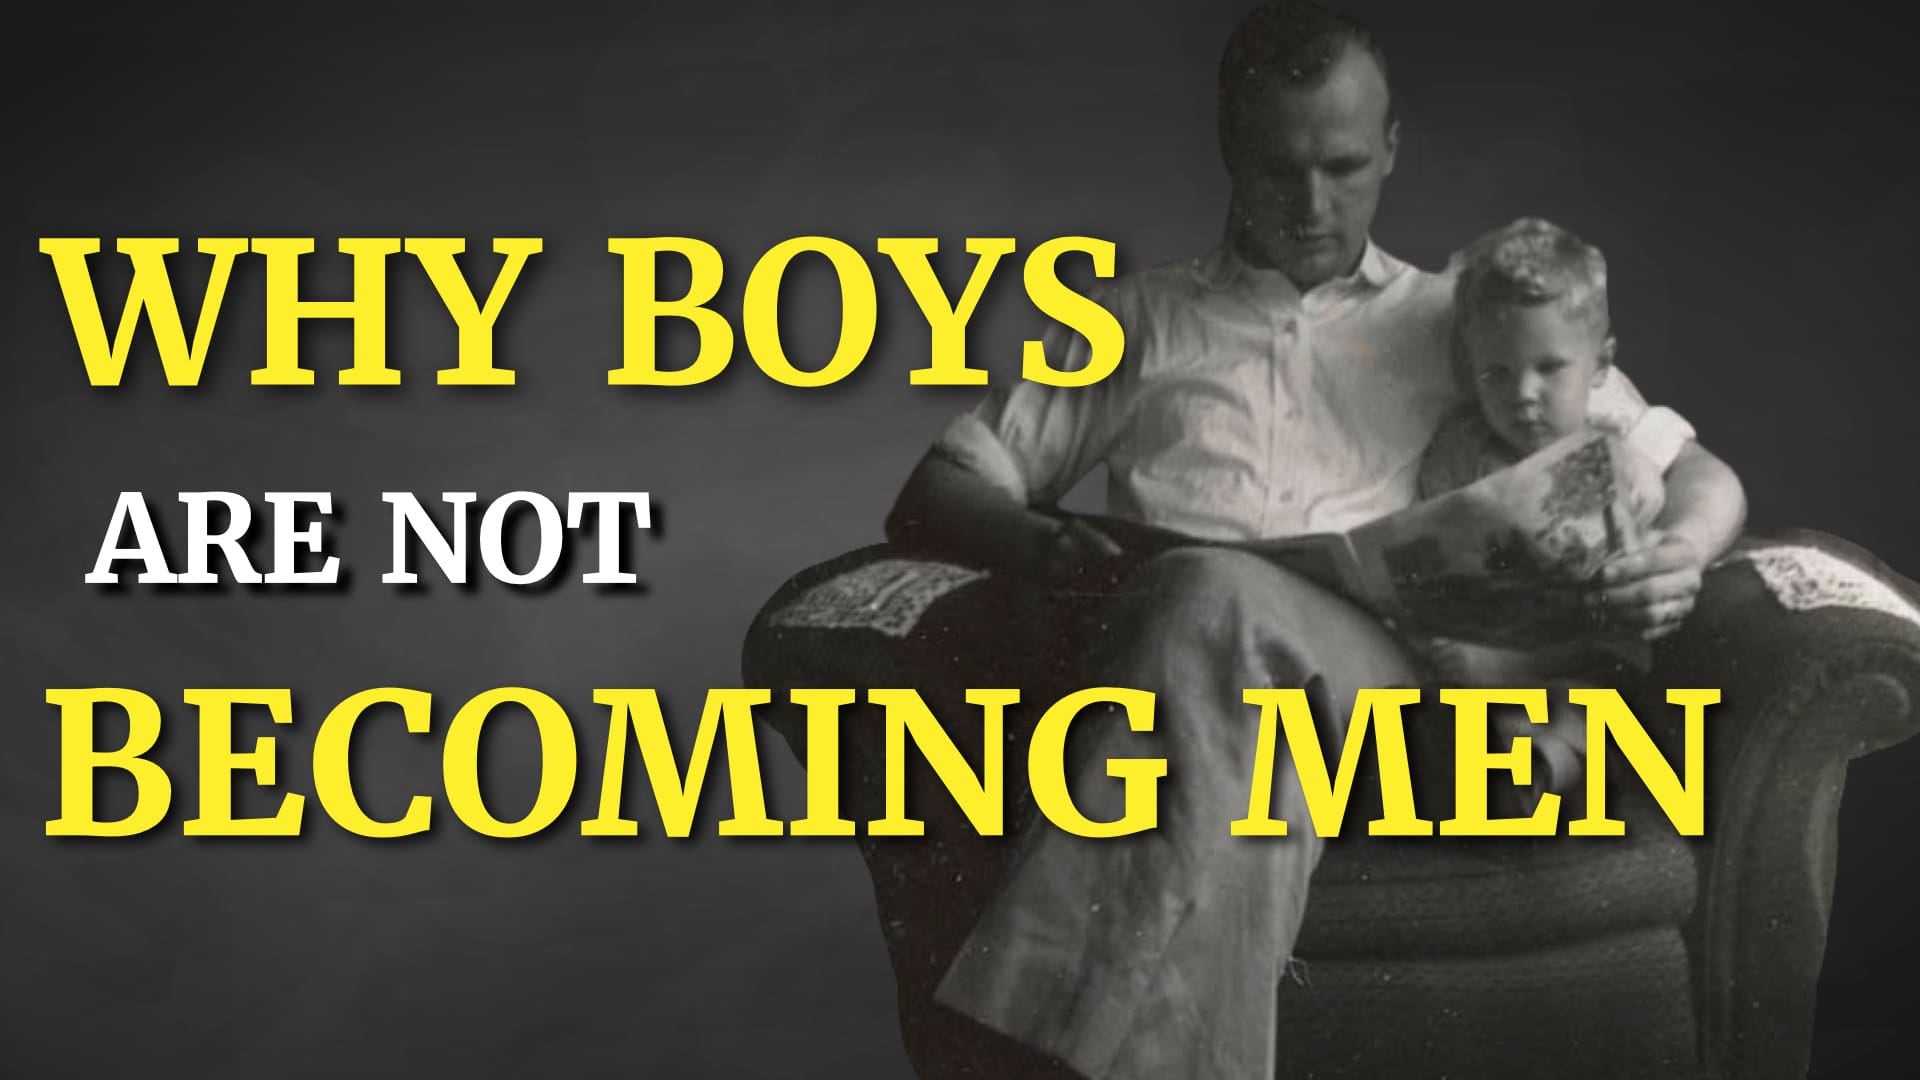 Why Boys Are Not Becoming Men